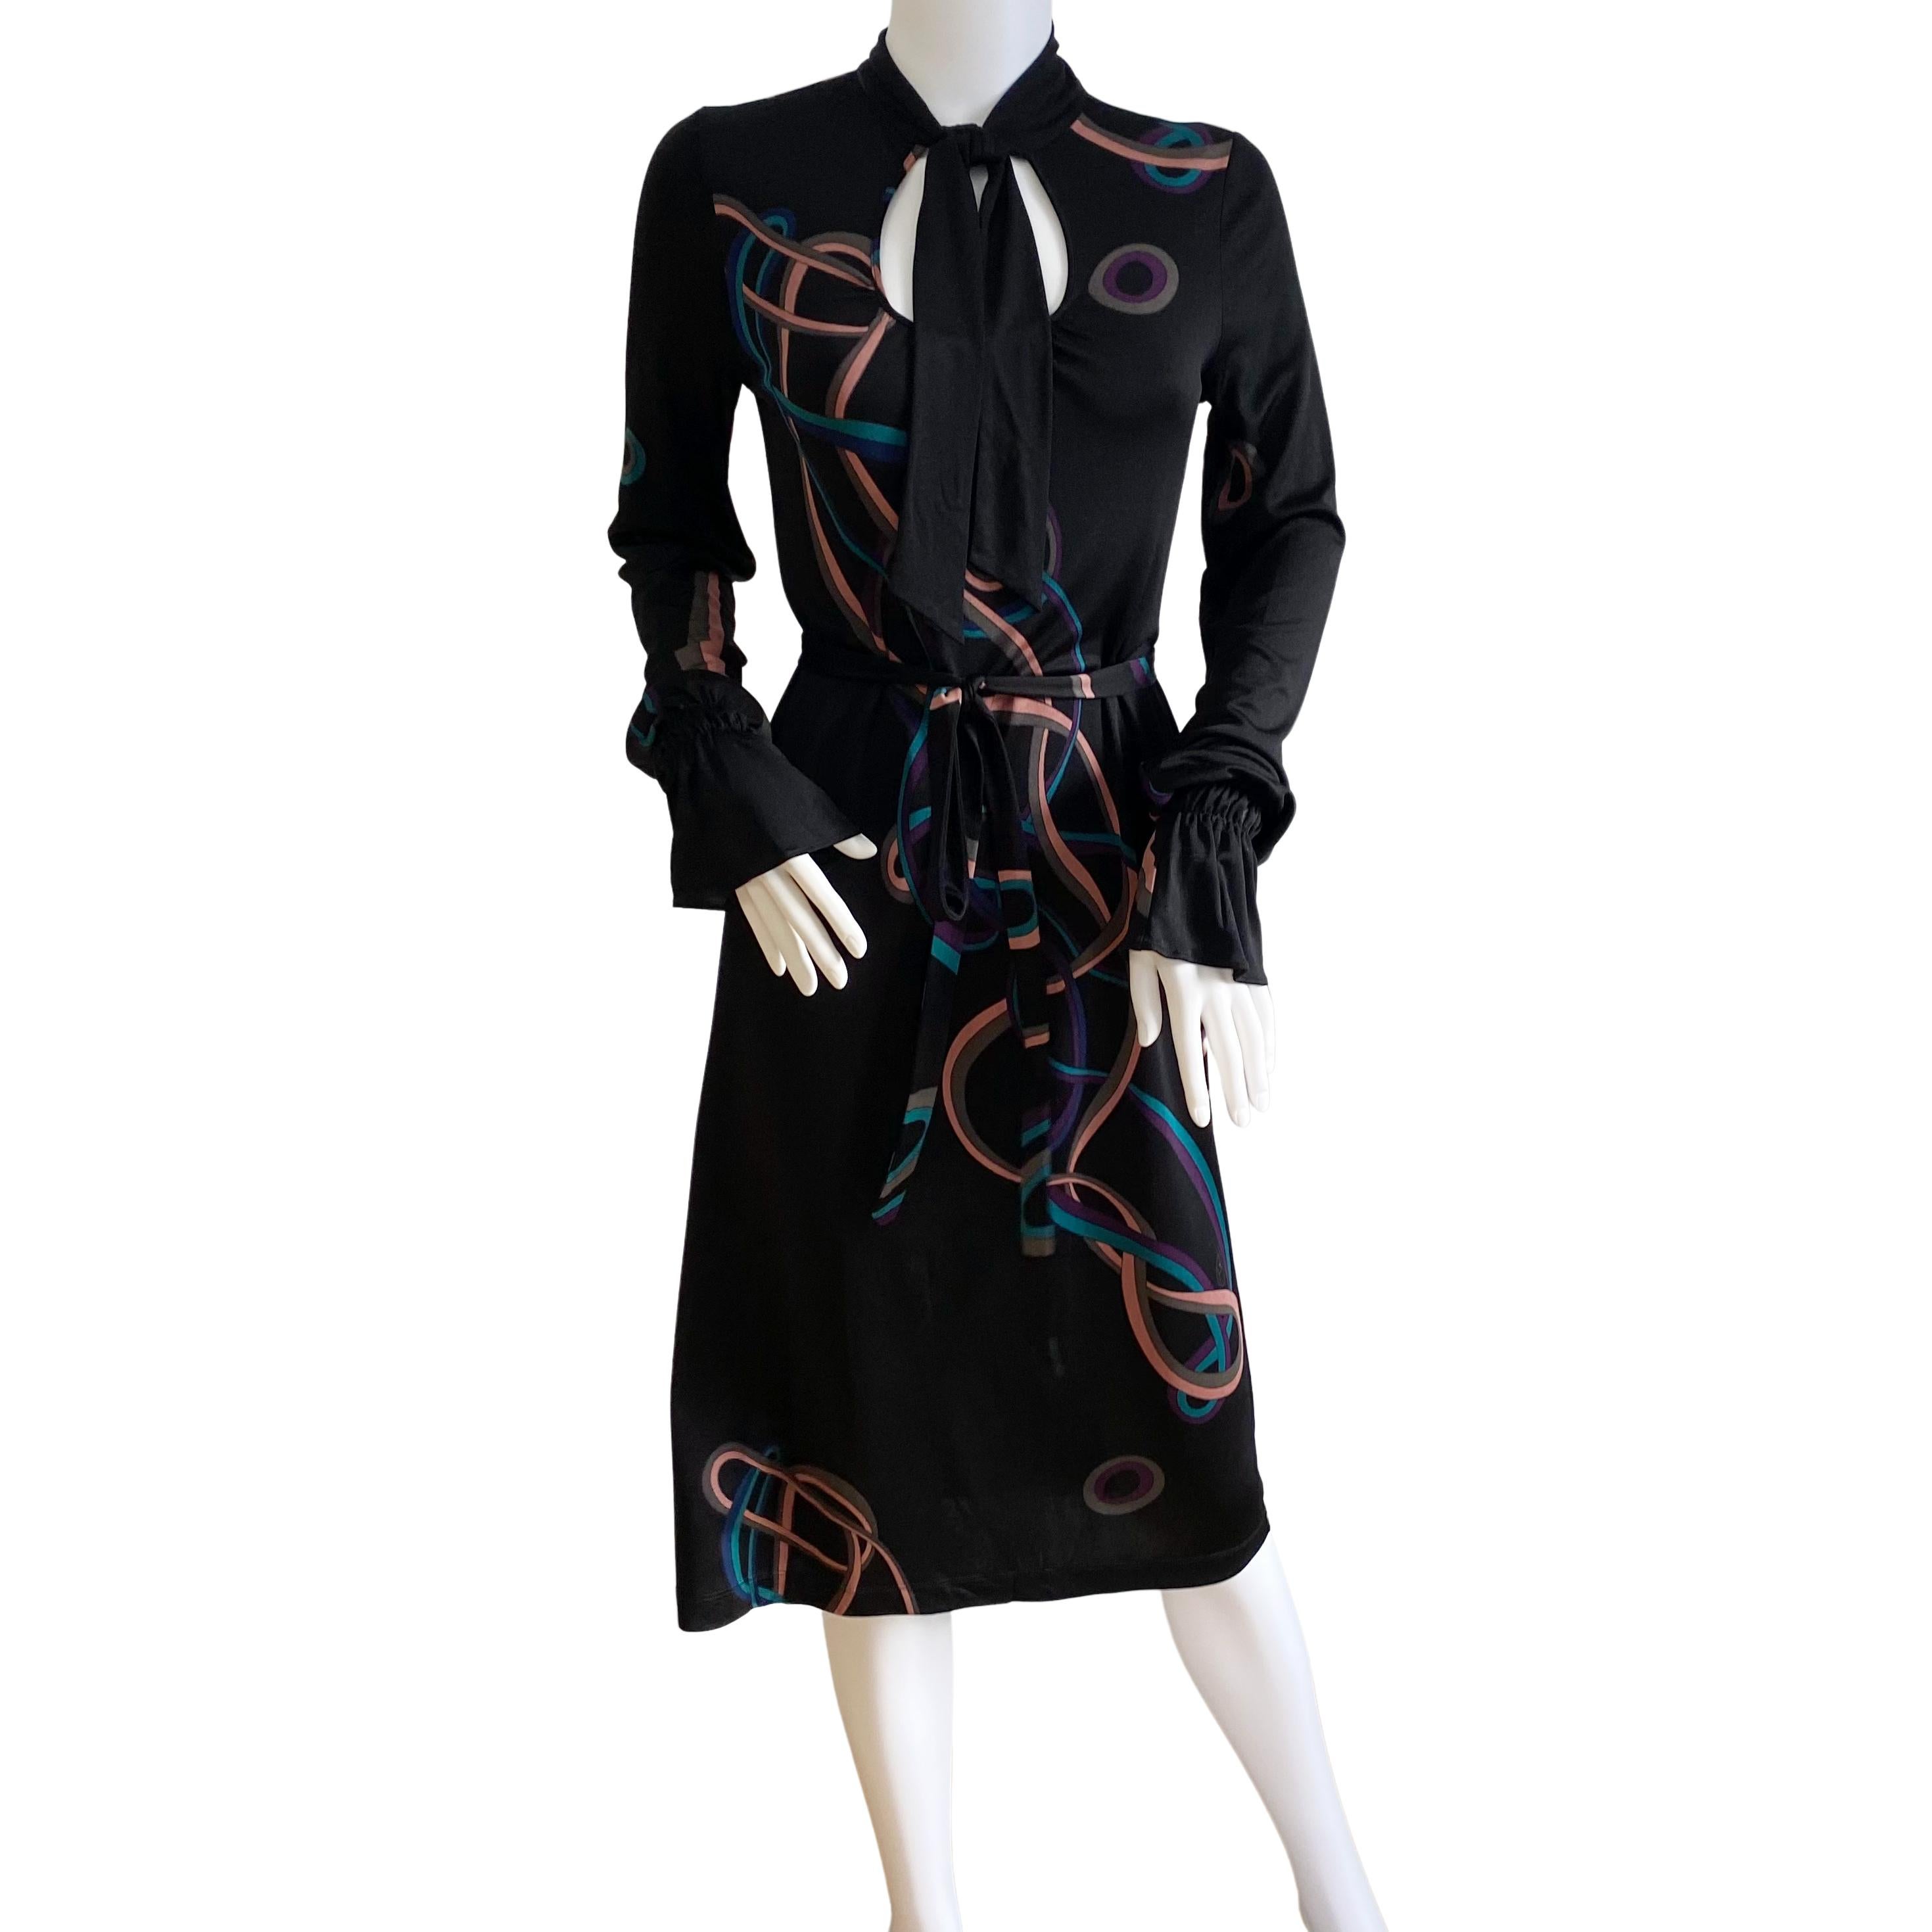 Condition: NEW WITH TAG.
Hand-designed and signed French Guimauve print.
Pussy bow shift dress with detached self belt.
Flattering graceful long lines with bell-sleeve details.

Approximately 43